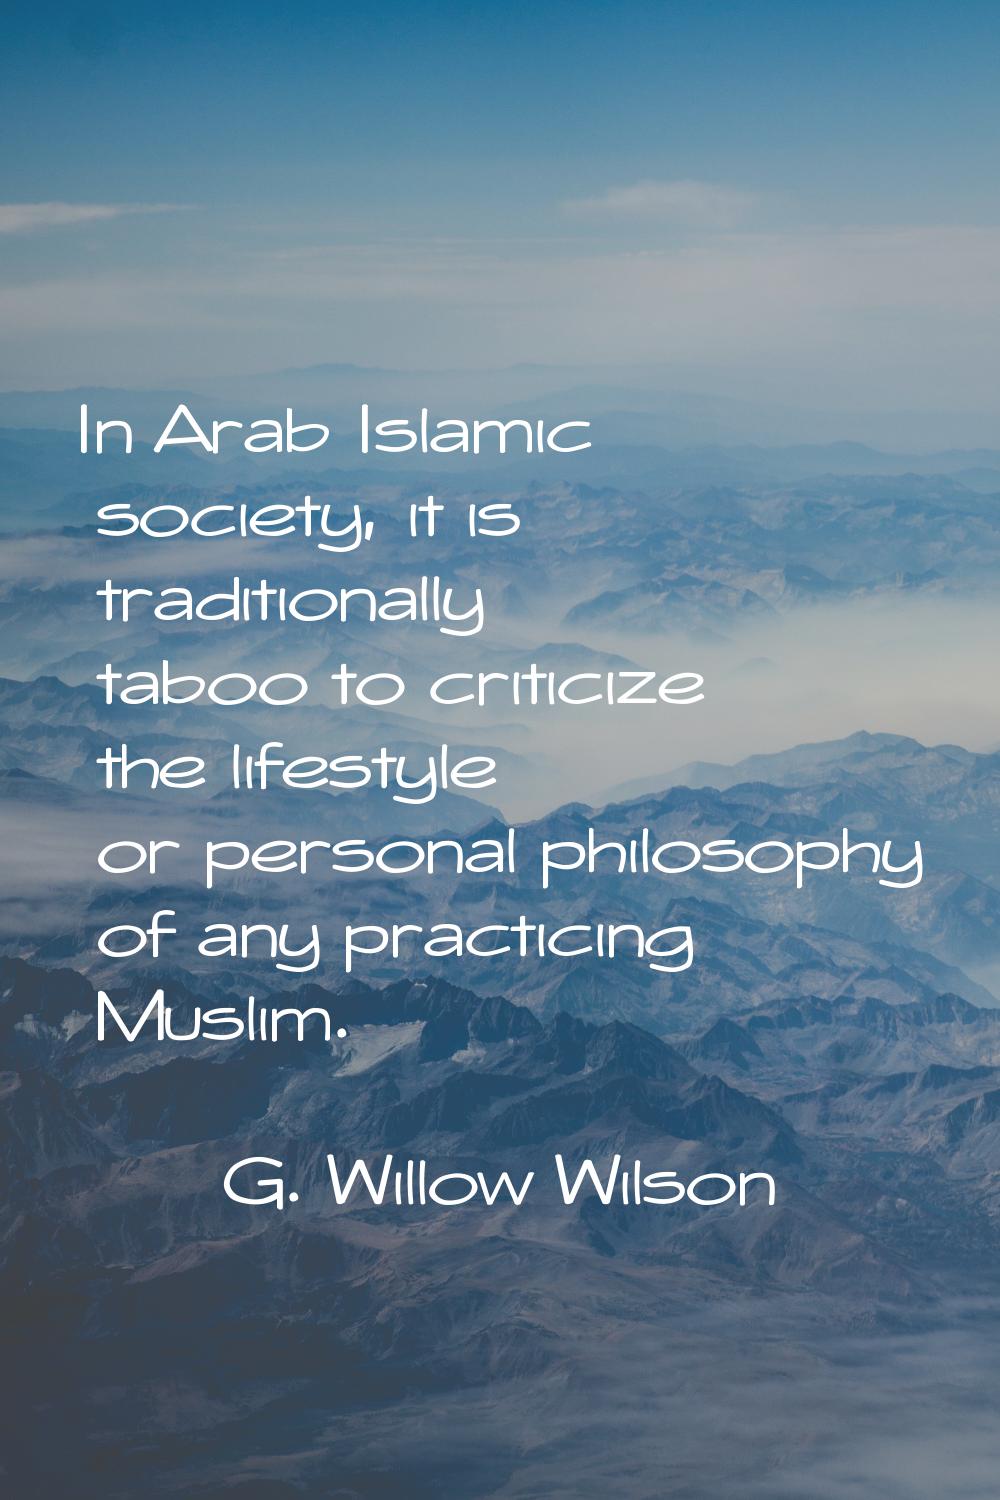 In Arab Islamic society, it is traditionally taboo to criticize the lifestyle or personal philosoph